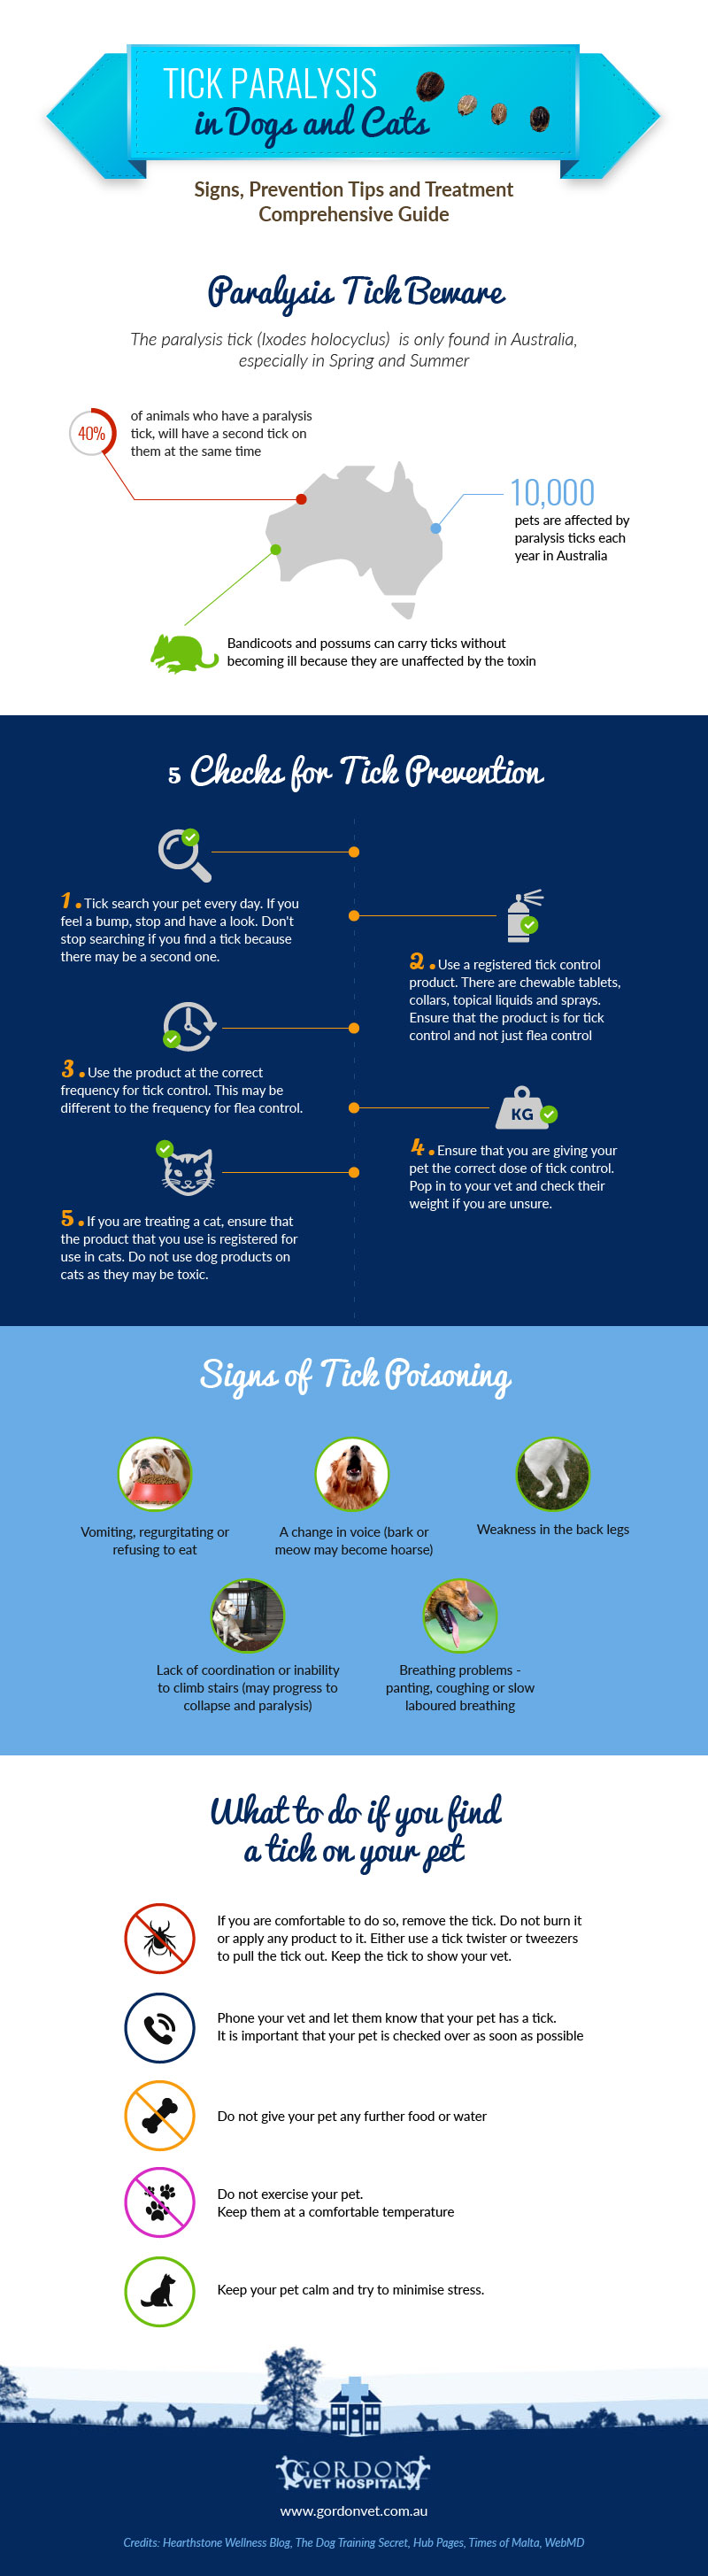 tick-paralysis-dogs-cats-infographic